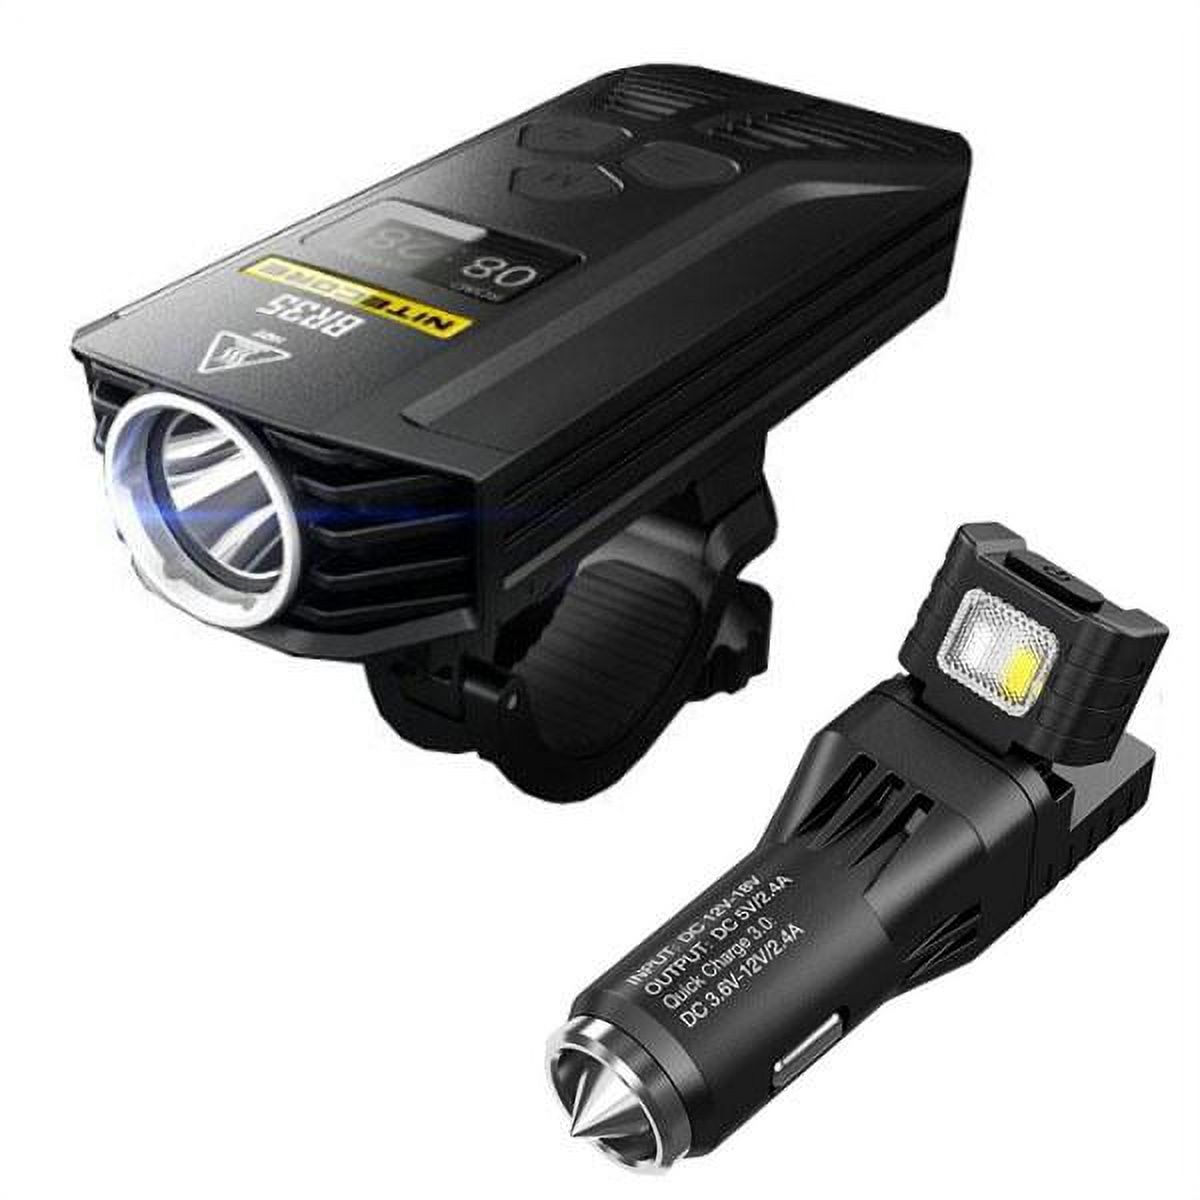 NITECORE BR35 1800 Lumen Rechargeable Bike Light -Cree, XM-L2 U2 LED with VCL10 Multi-Tool and USB Car Adapter - image 1 of 11